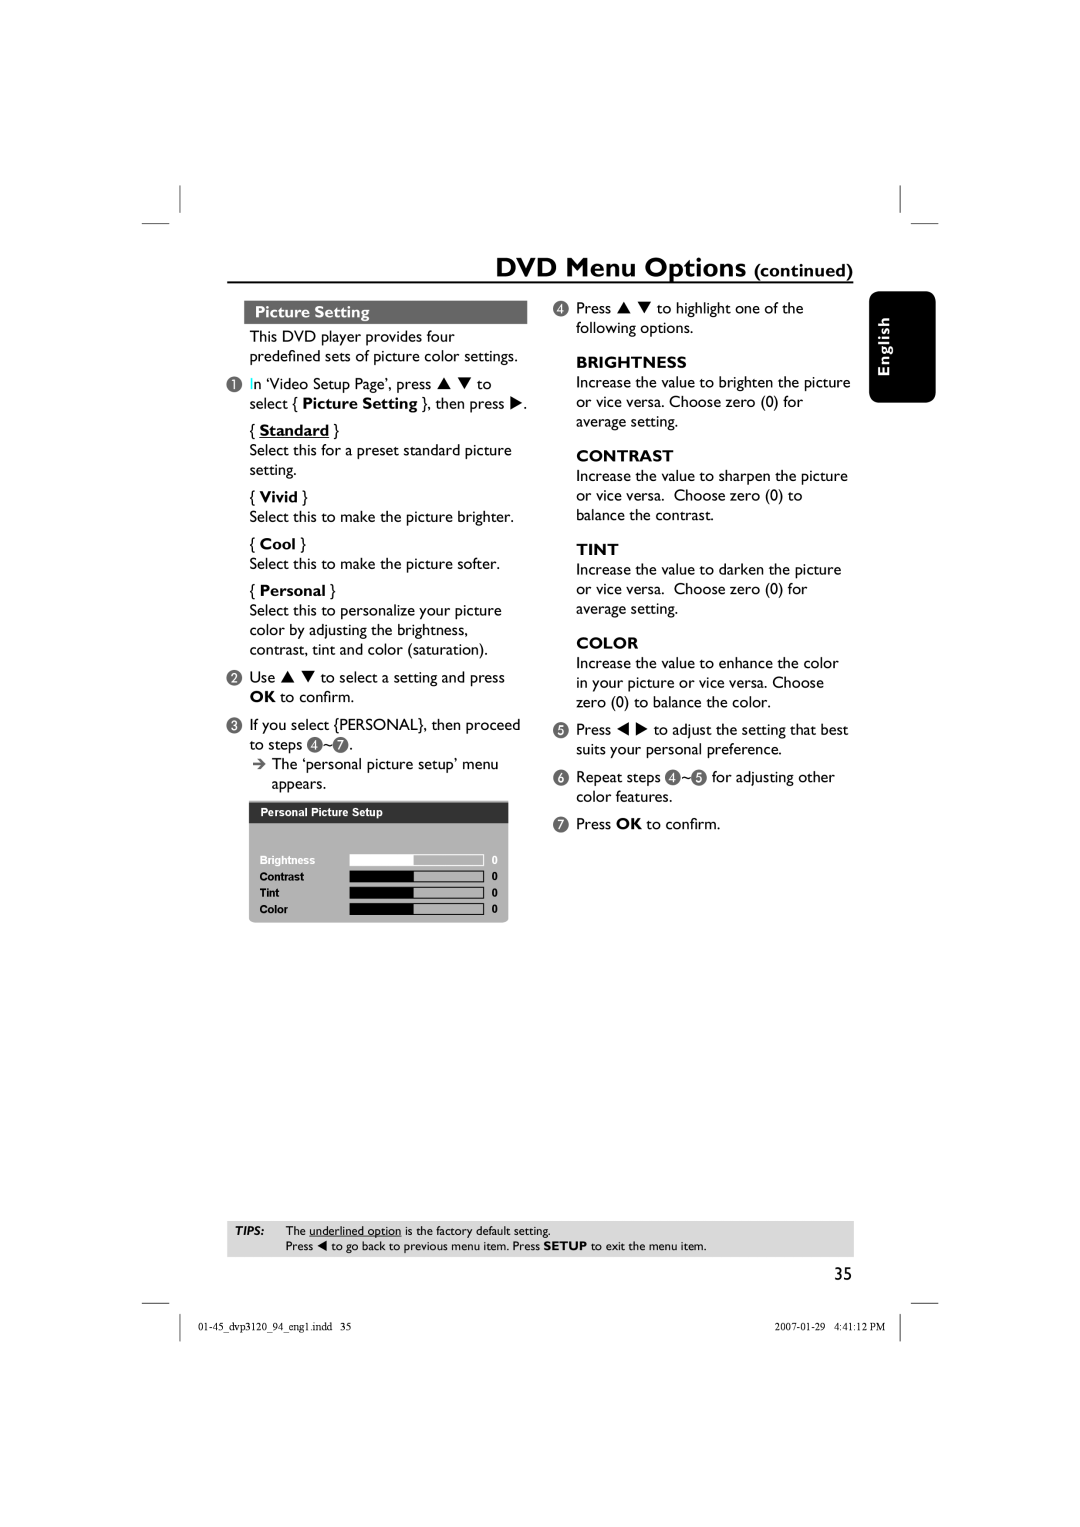 Philips DVP3721X/94 Picture Setting, Standard, Vivid, Cool, Personal, Brightness, Contrast, Tint, Color, English 